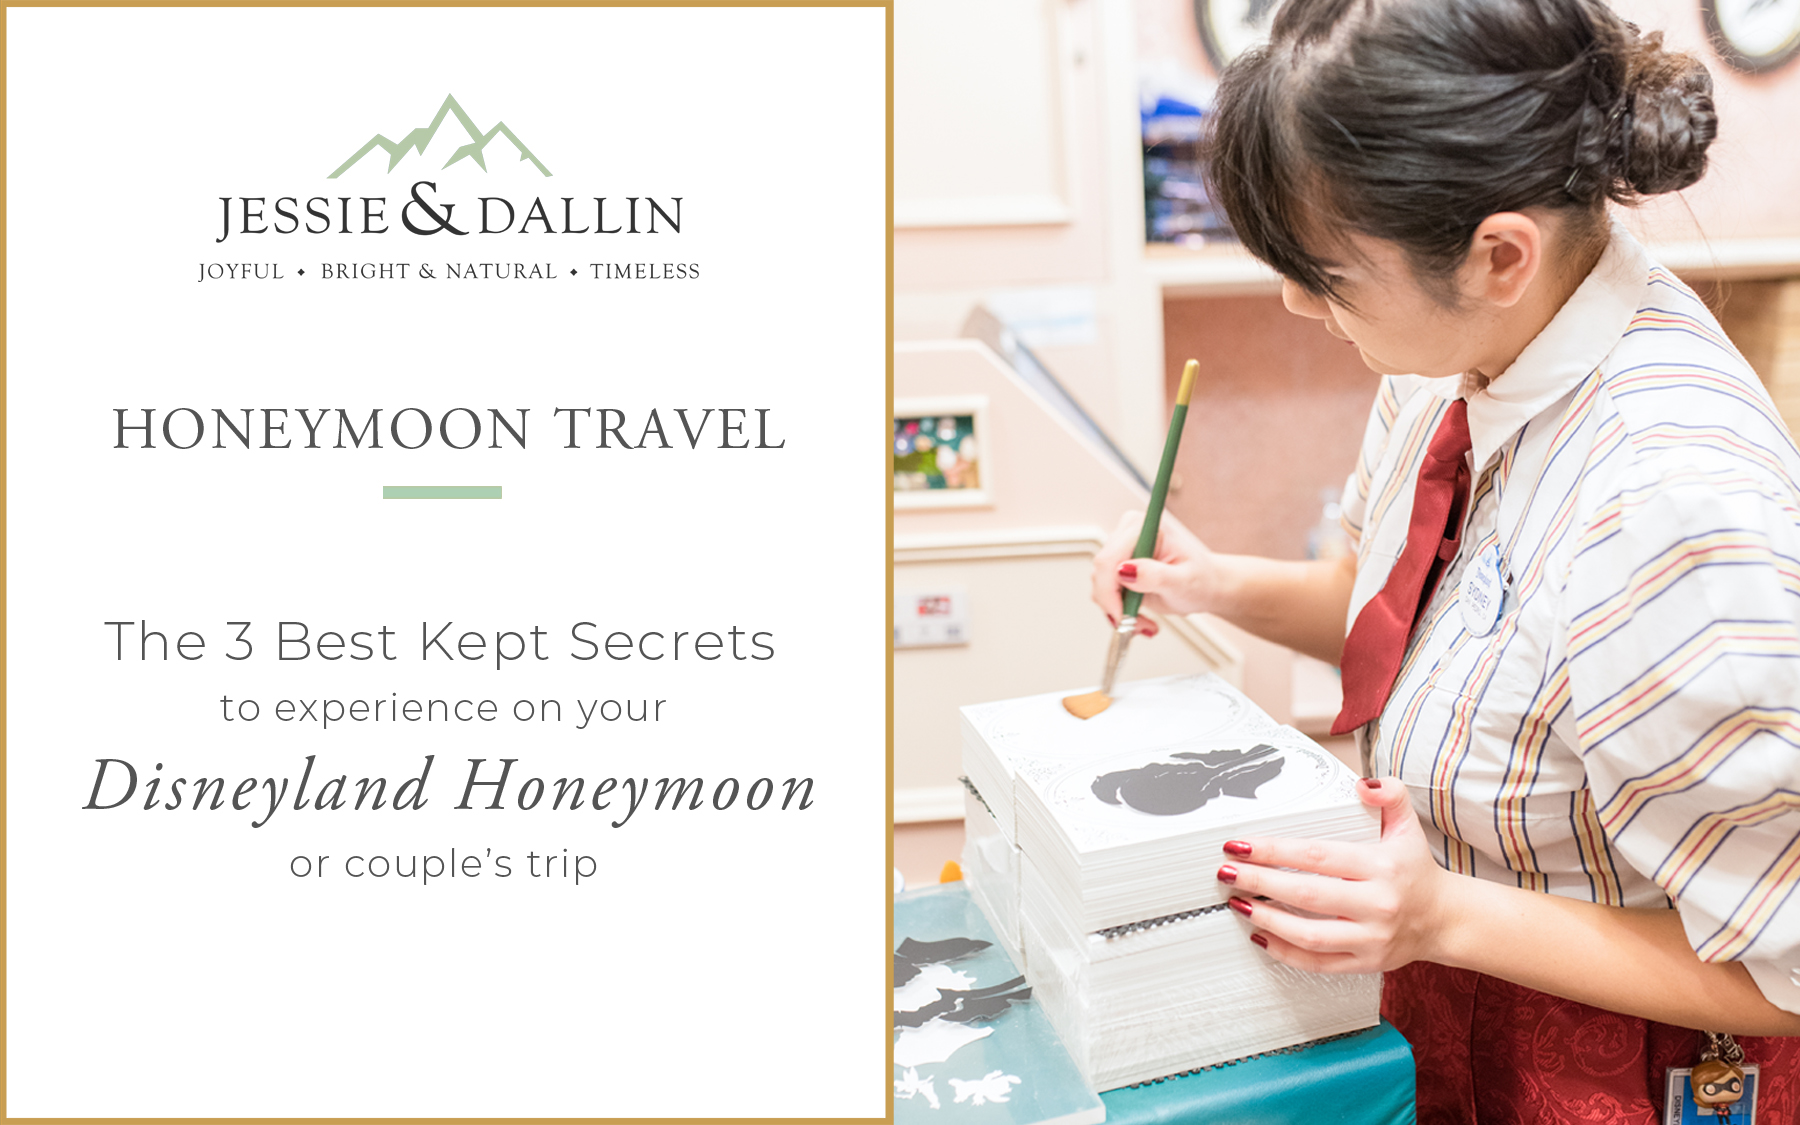 The 3 Best Kept Disneyland Secrets to Experience on Your Honeymoon | Jessie and Dallin Photography